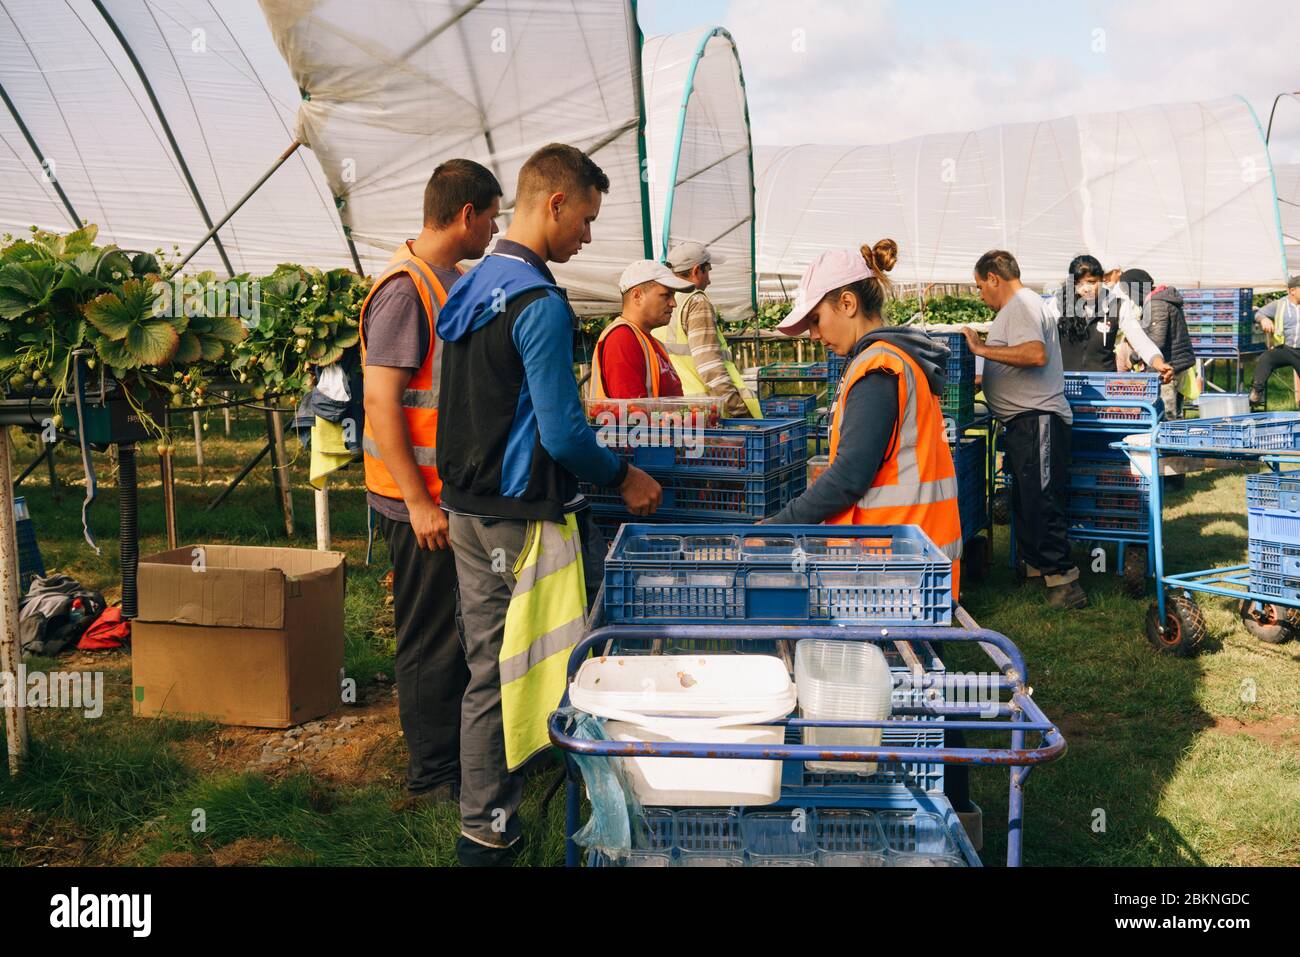 European migrant workers pick strawberries on a large commercial farm, which supplies British supermarkets. Stock Photo